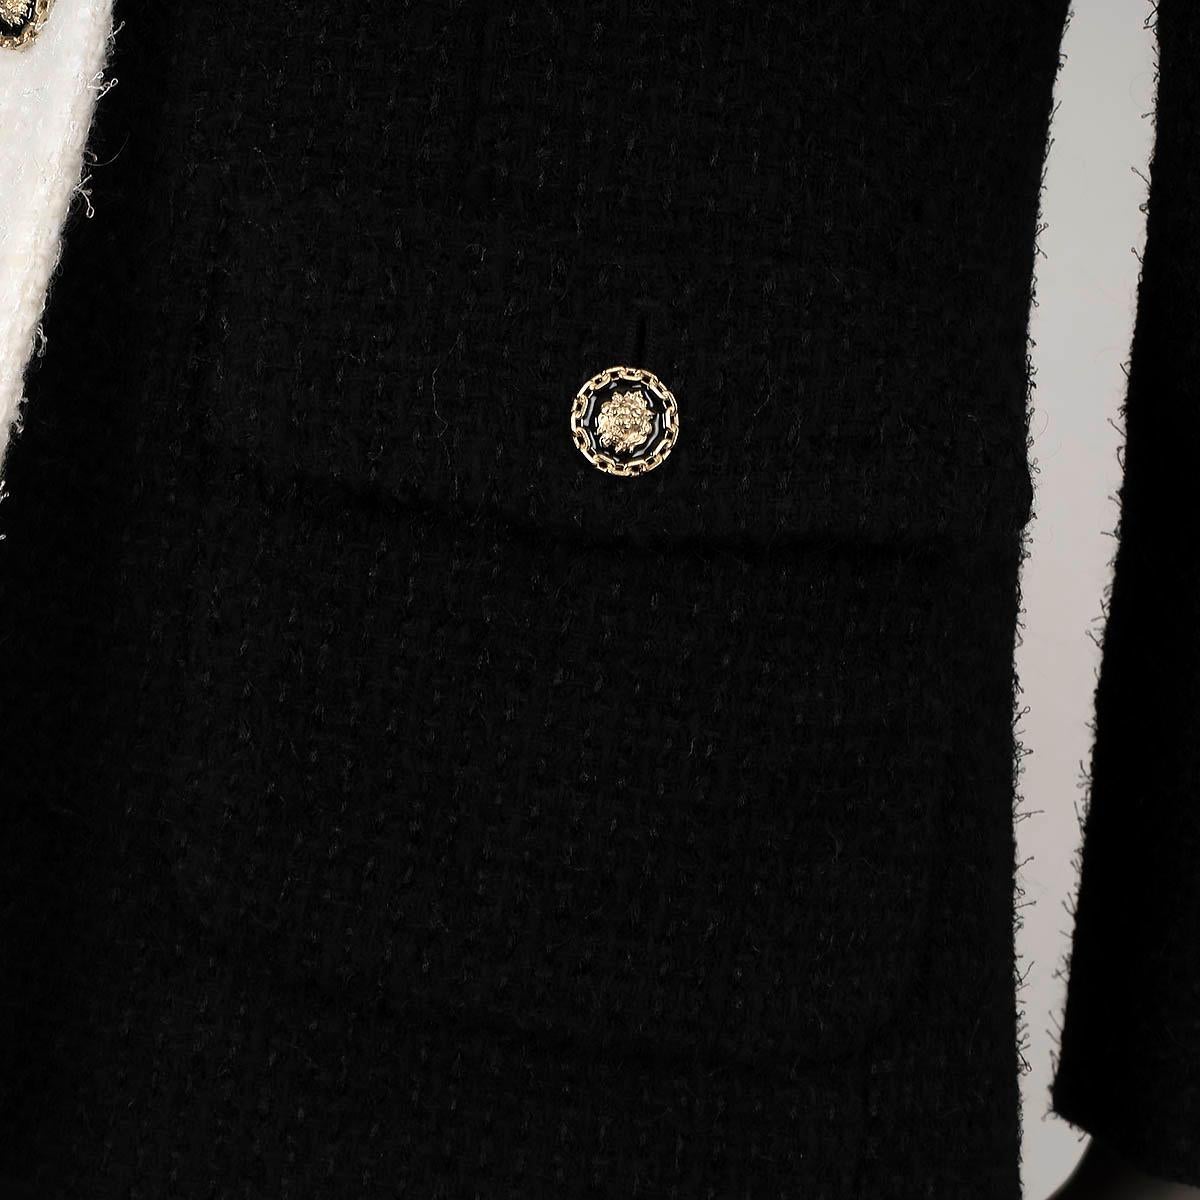 CHANEL white & black wool 2020 20A 31 RUE CAMBON TWEED Jacket 38 S 3